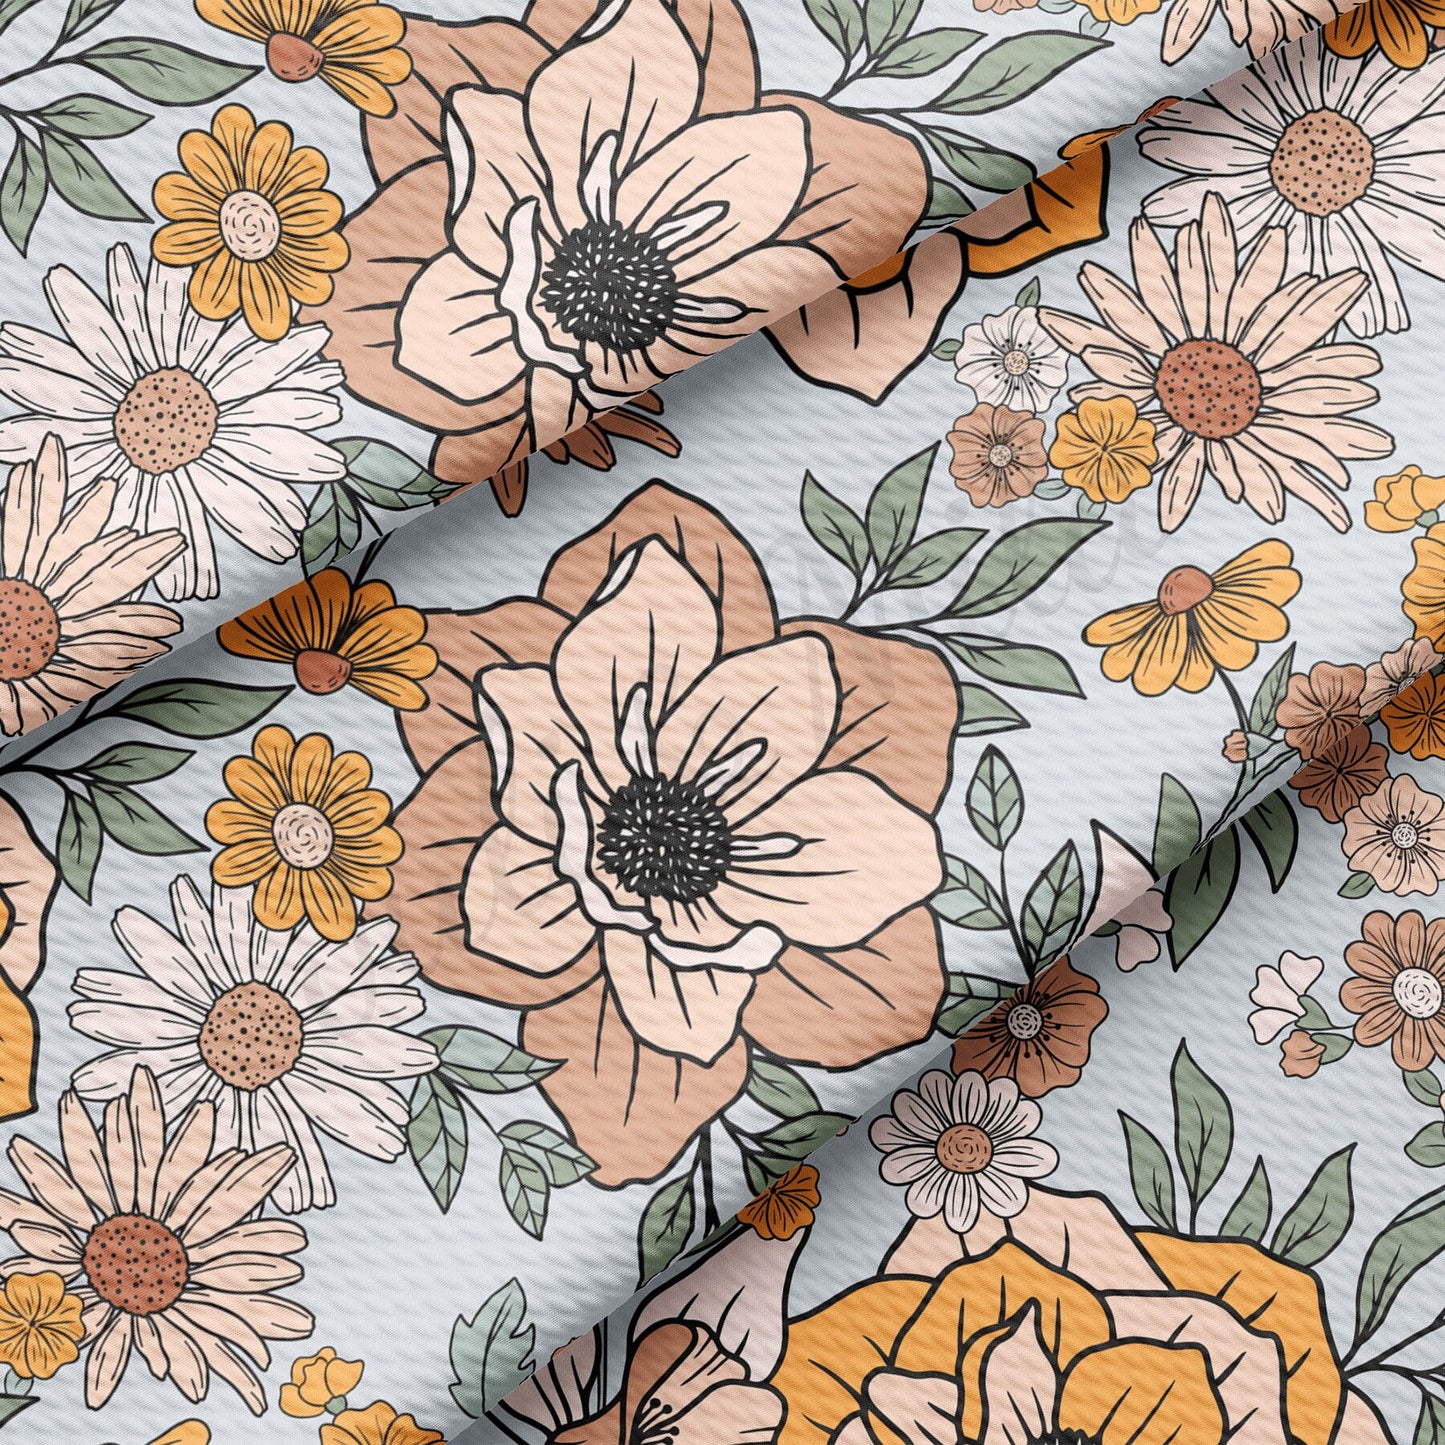 Floral  Bullet Textured Fabric by the yard AA1606